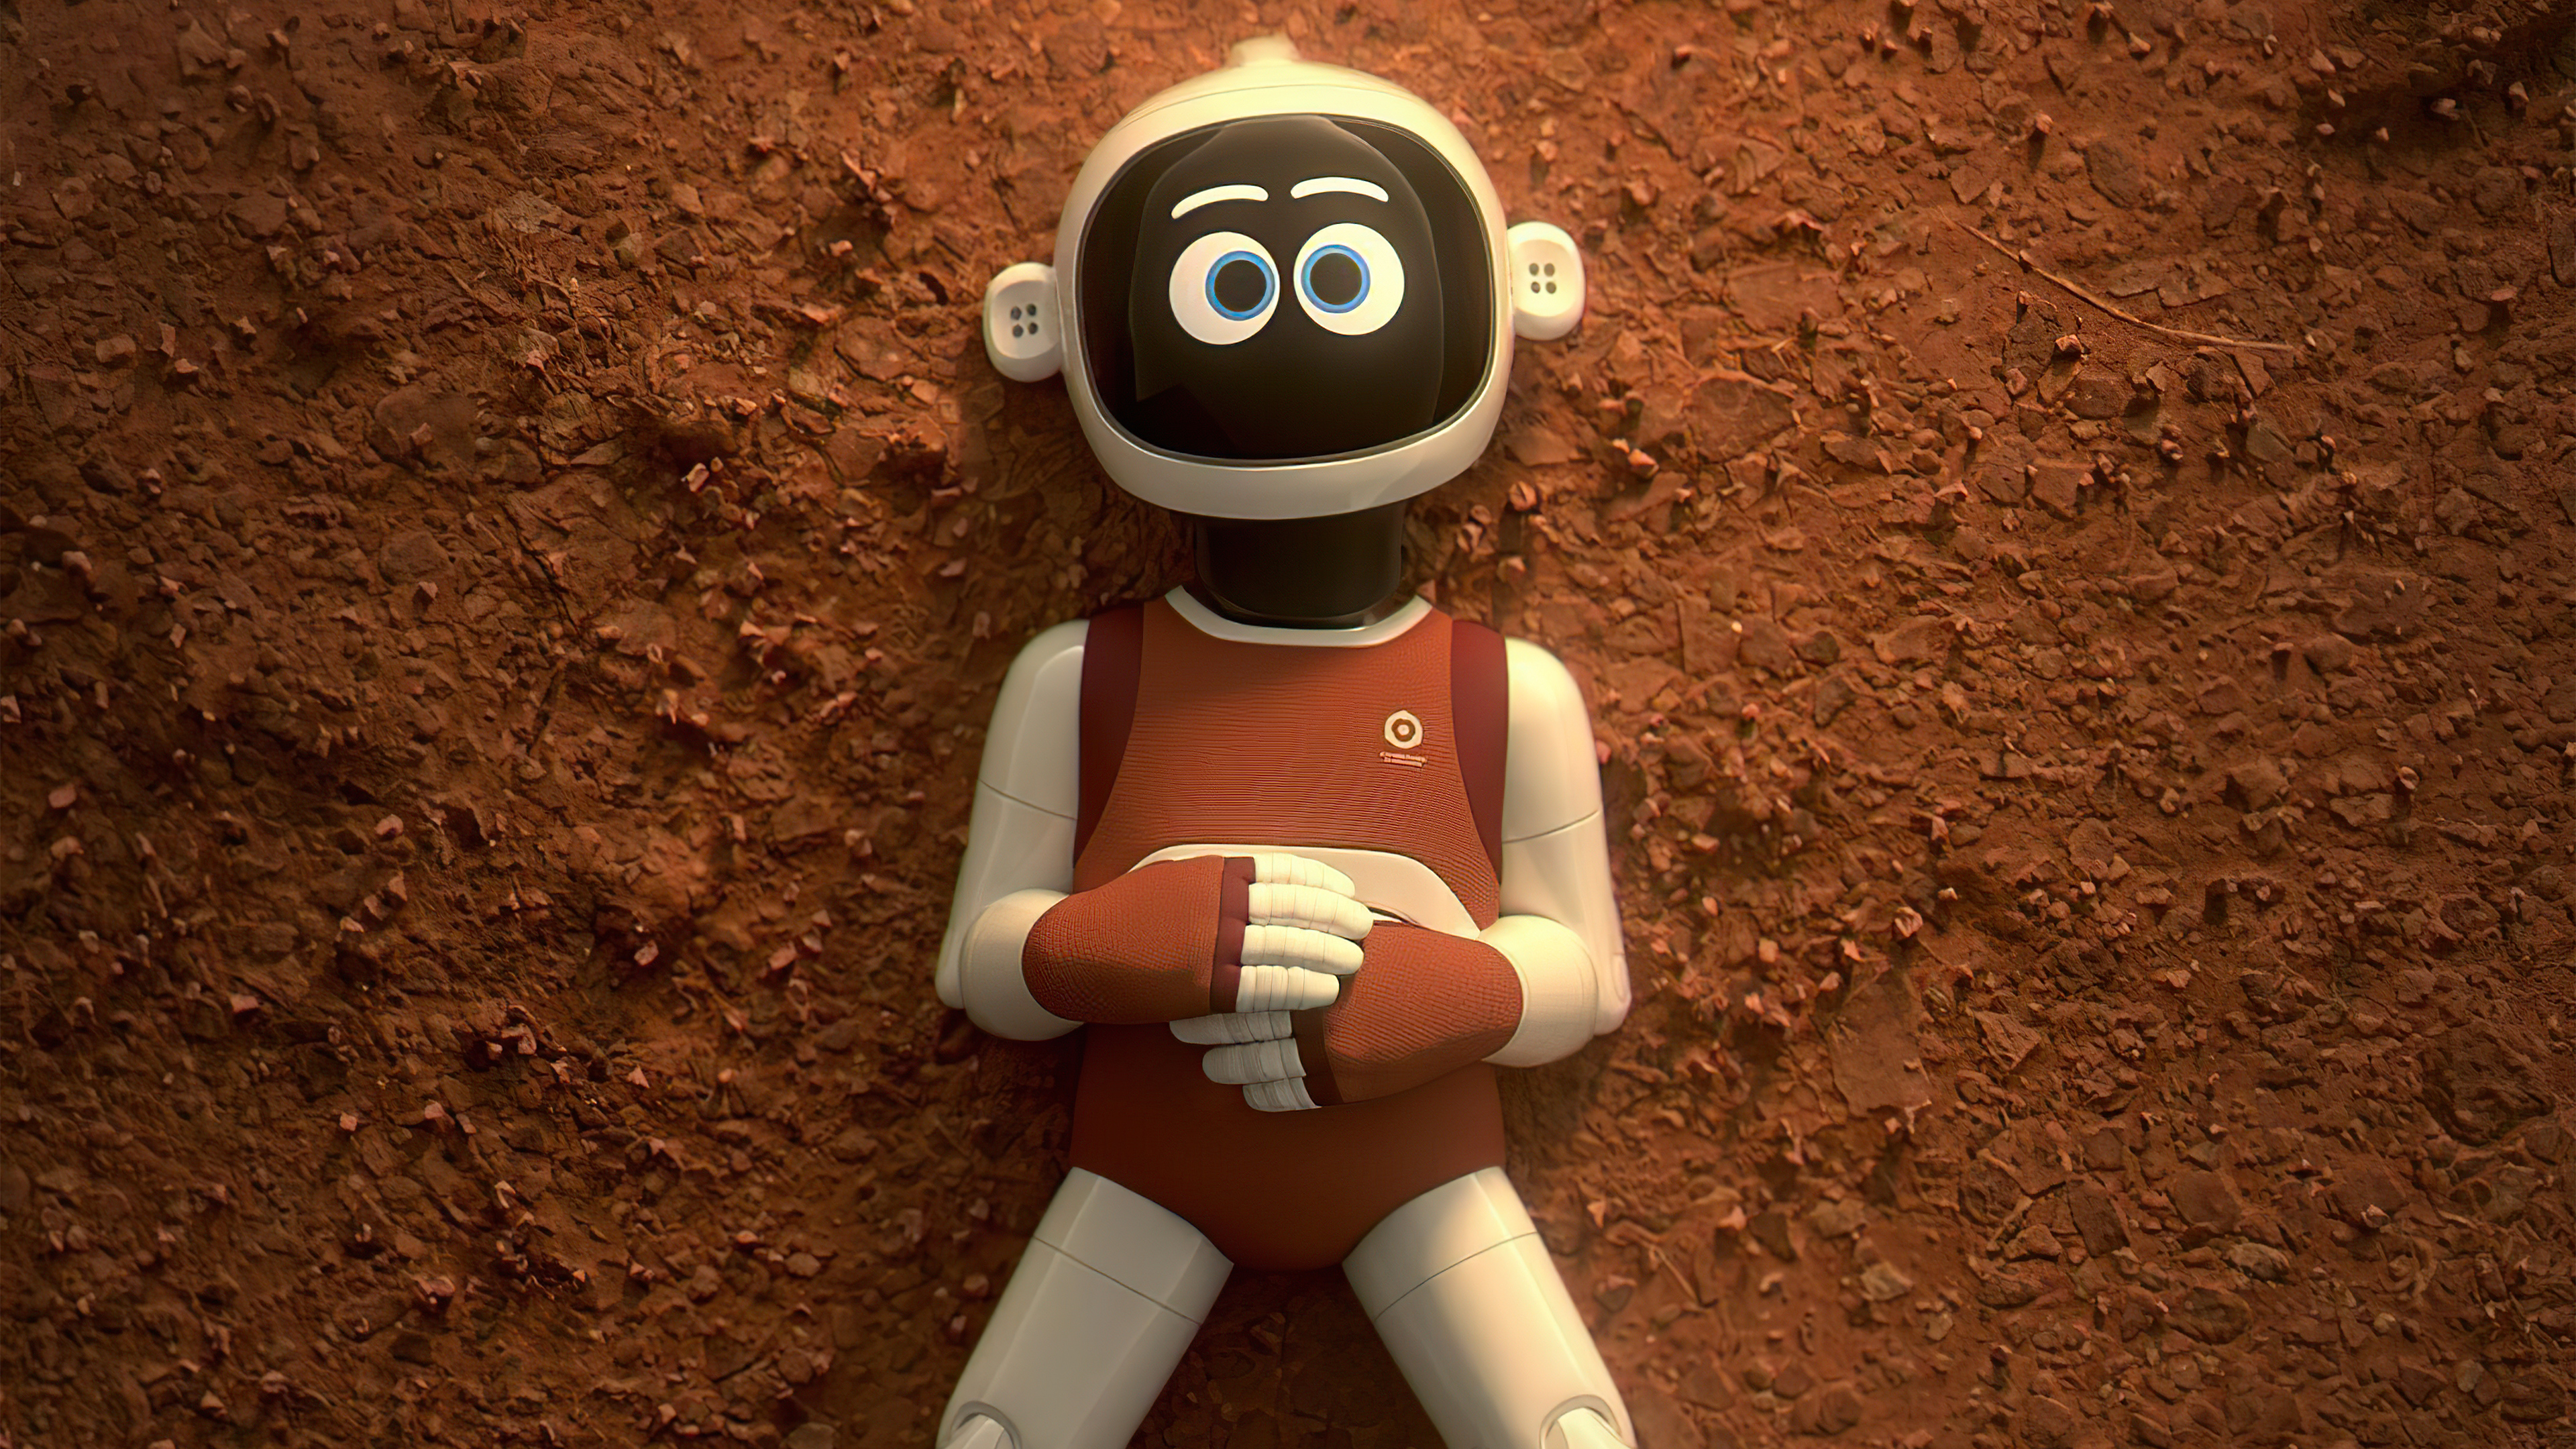 The mono mars robot is lying on the ground